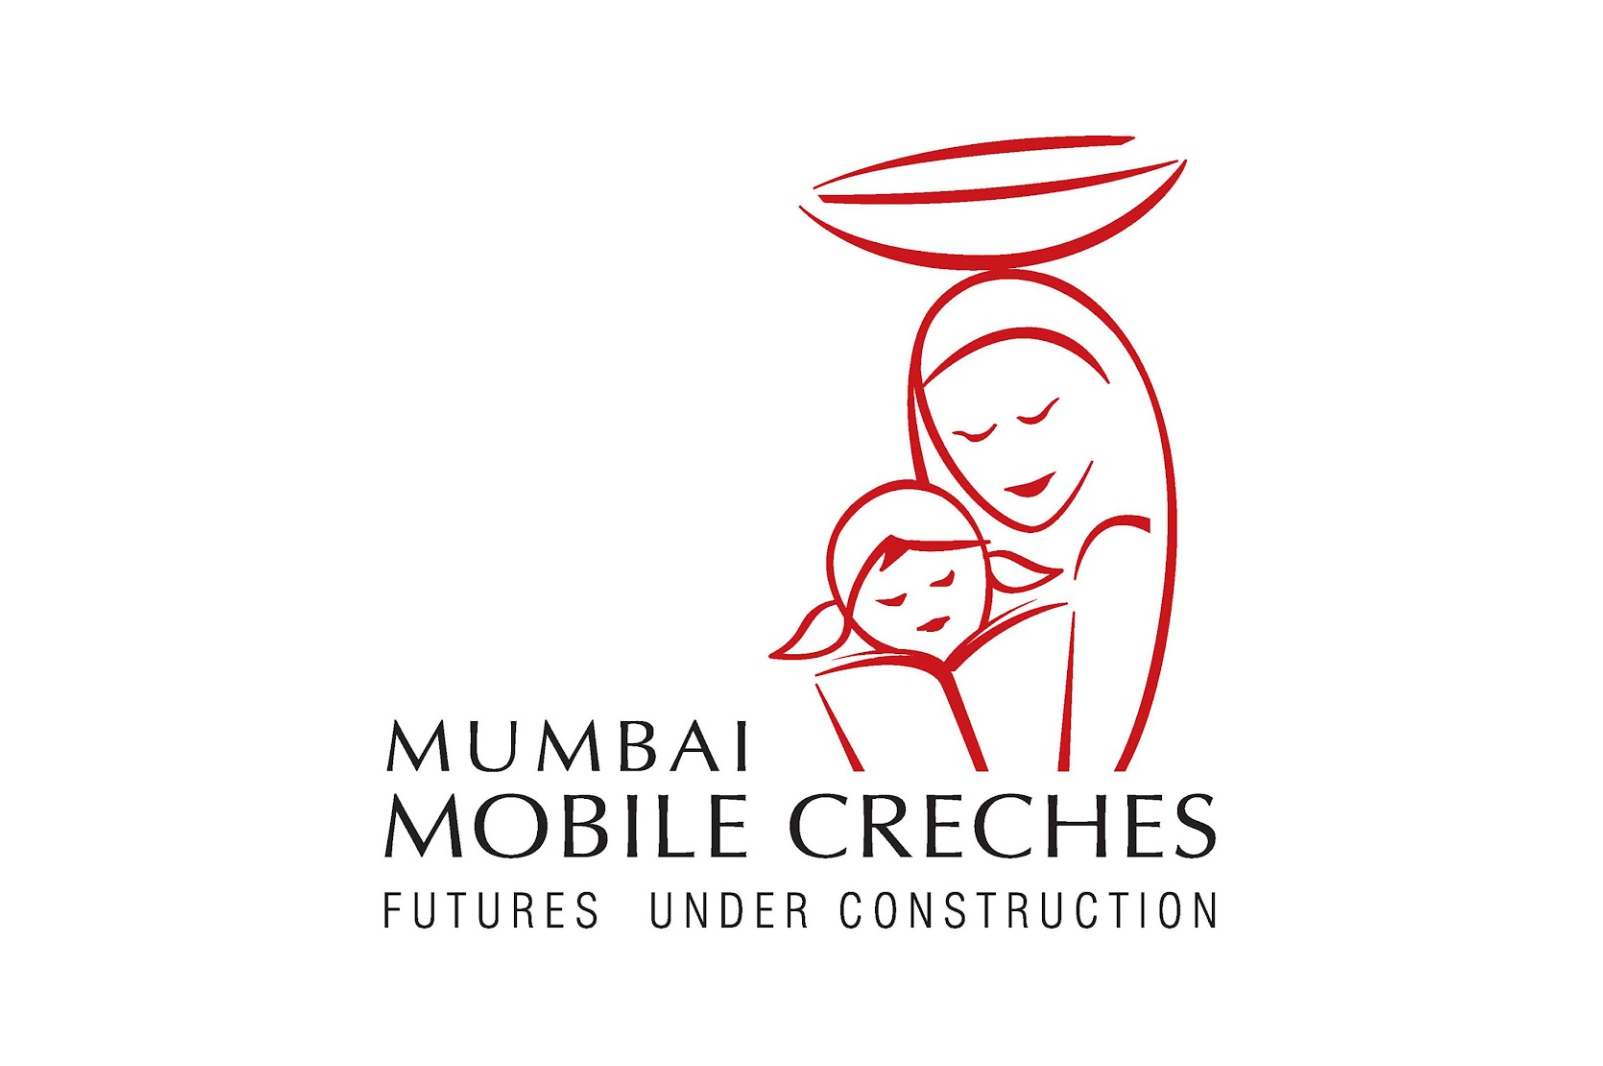 Mumbai Mobile Creches: an NGO in Mumbai caring for children of migrant labourers